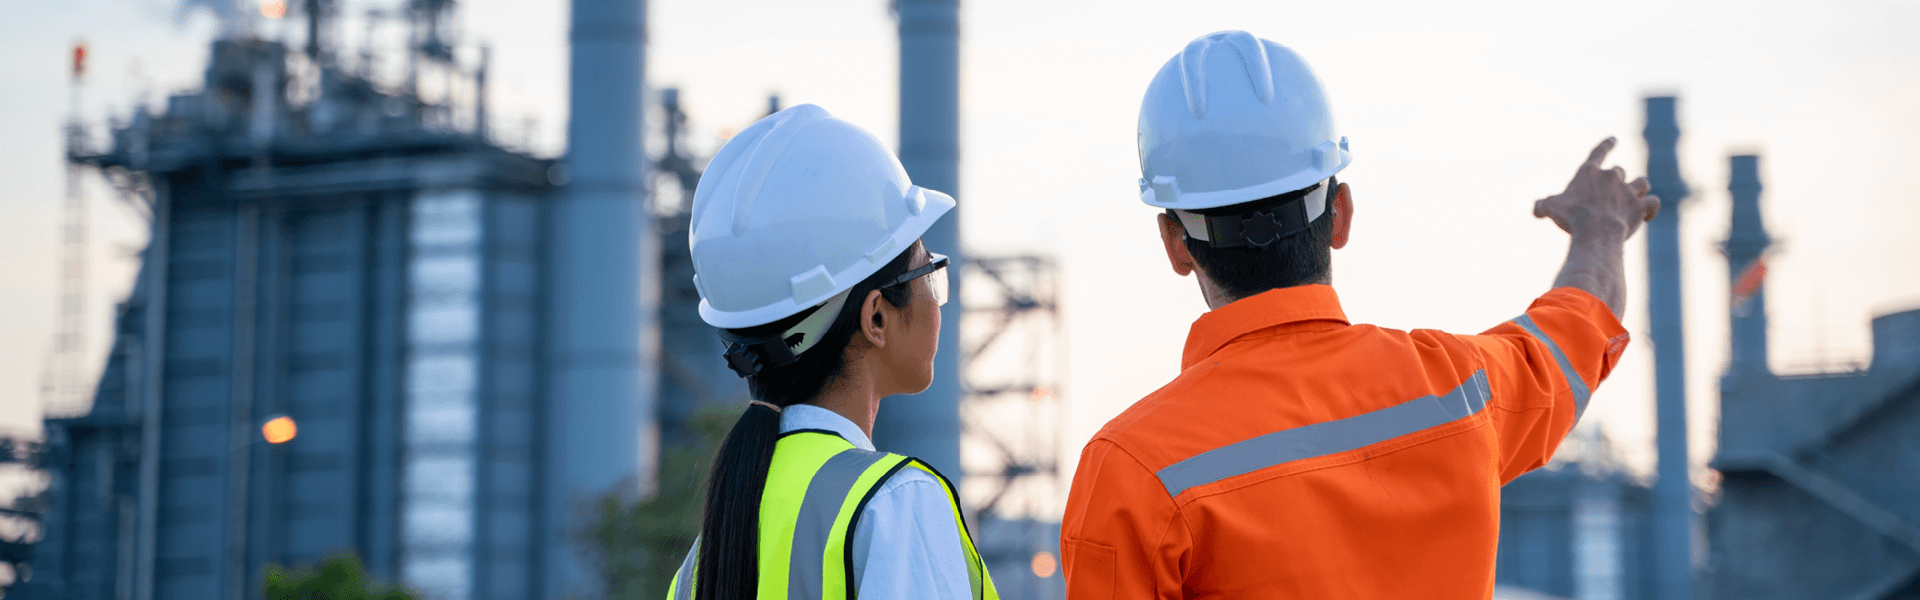 Man and Woman Worker Having Discussion Outside of Chemical Plant